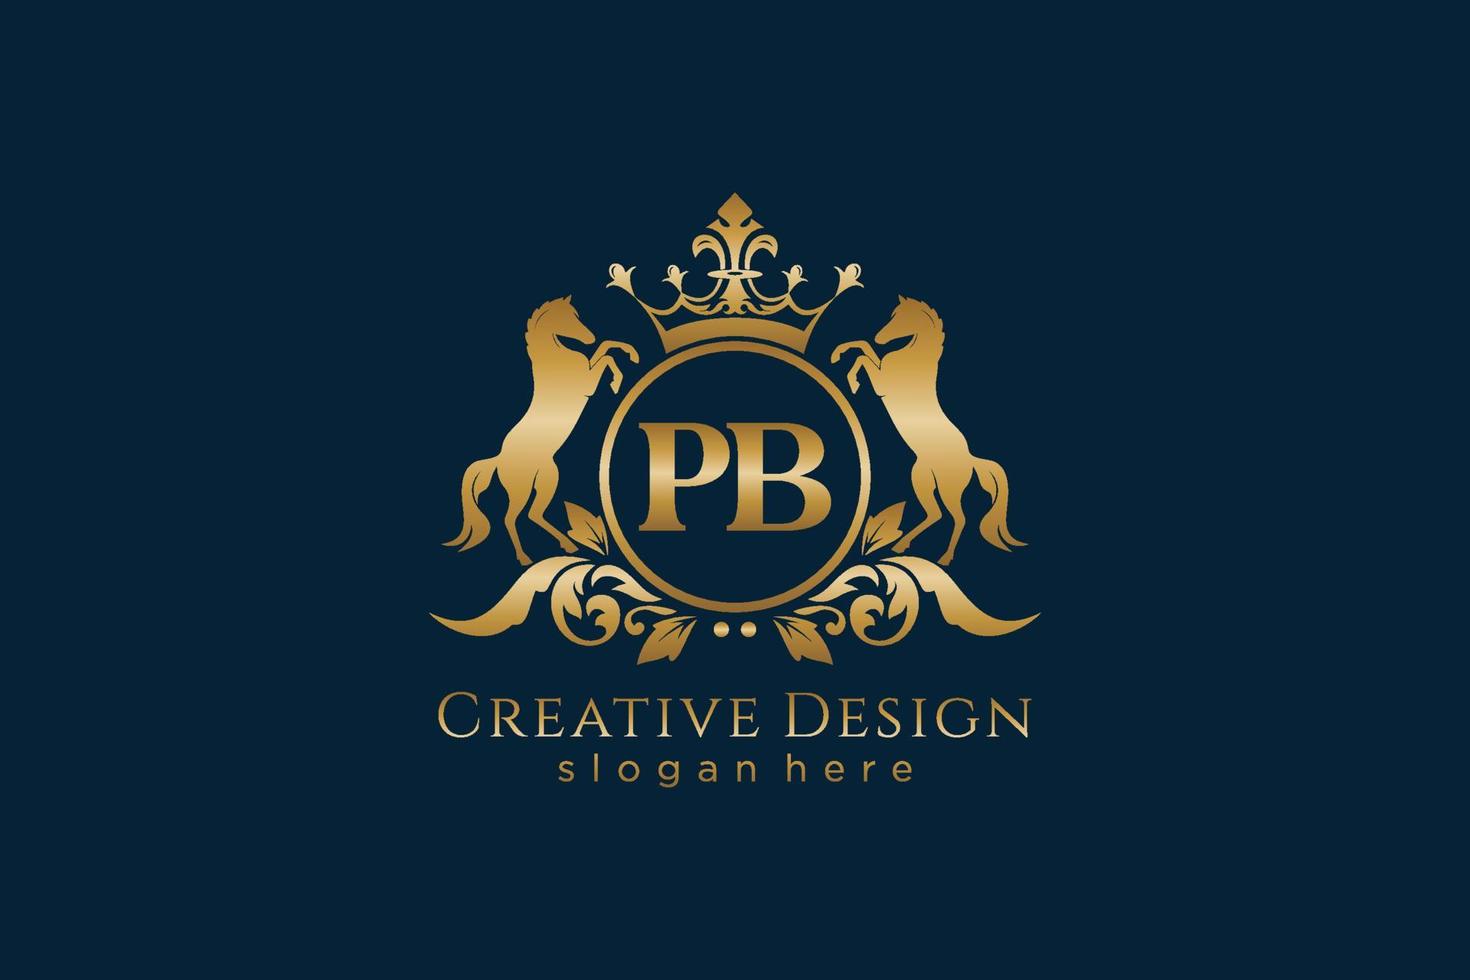 initial PB Retro golden crest with circle and two horses, badge template with scrolls and royal crown - perfect for luxurious branding projects vector